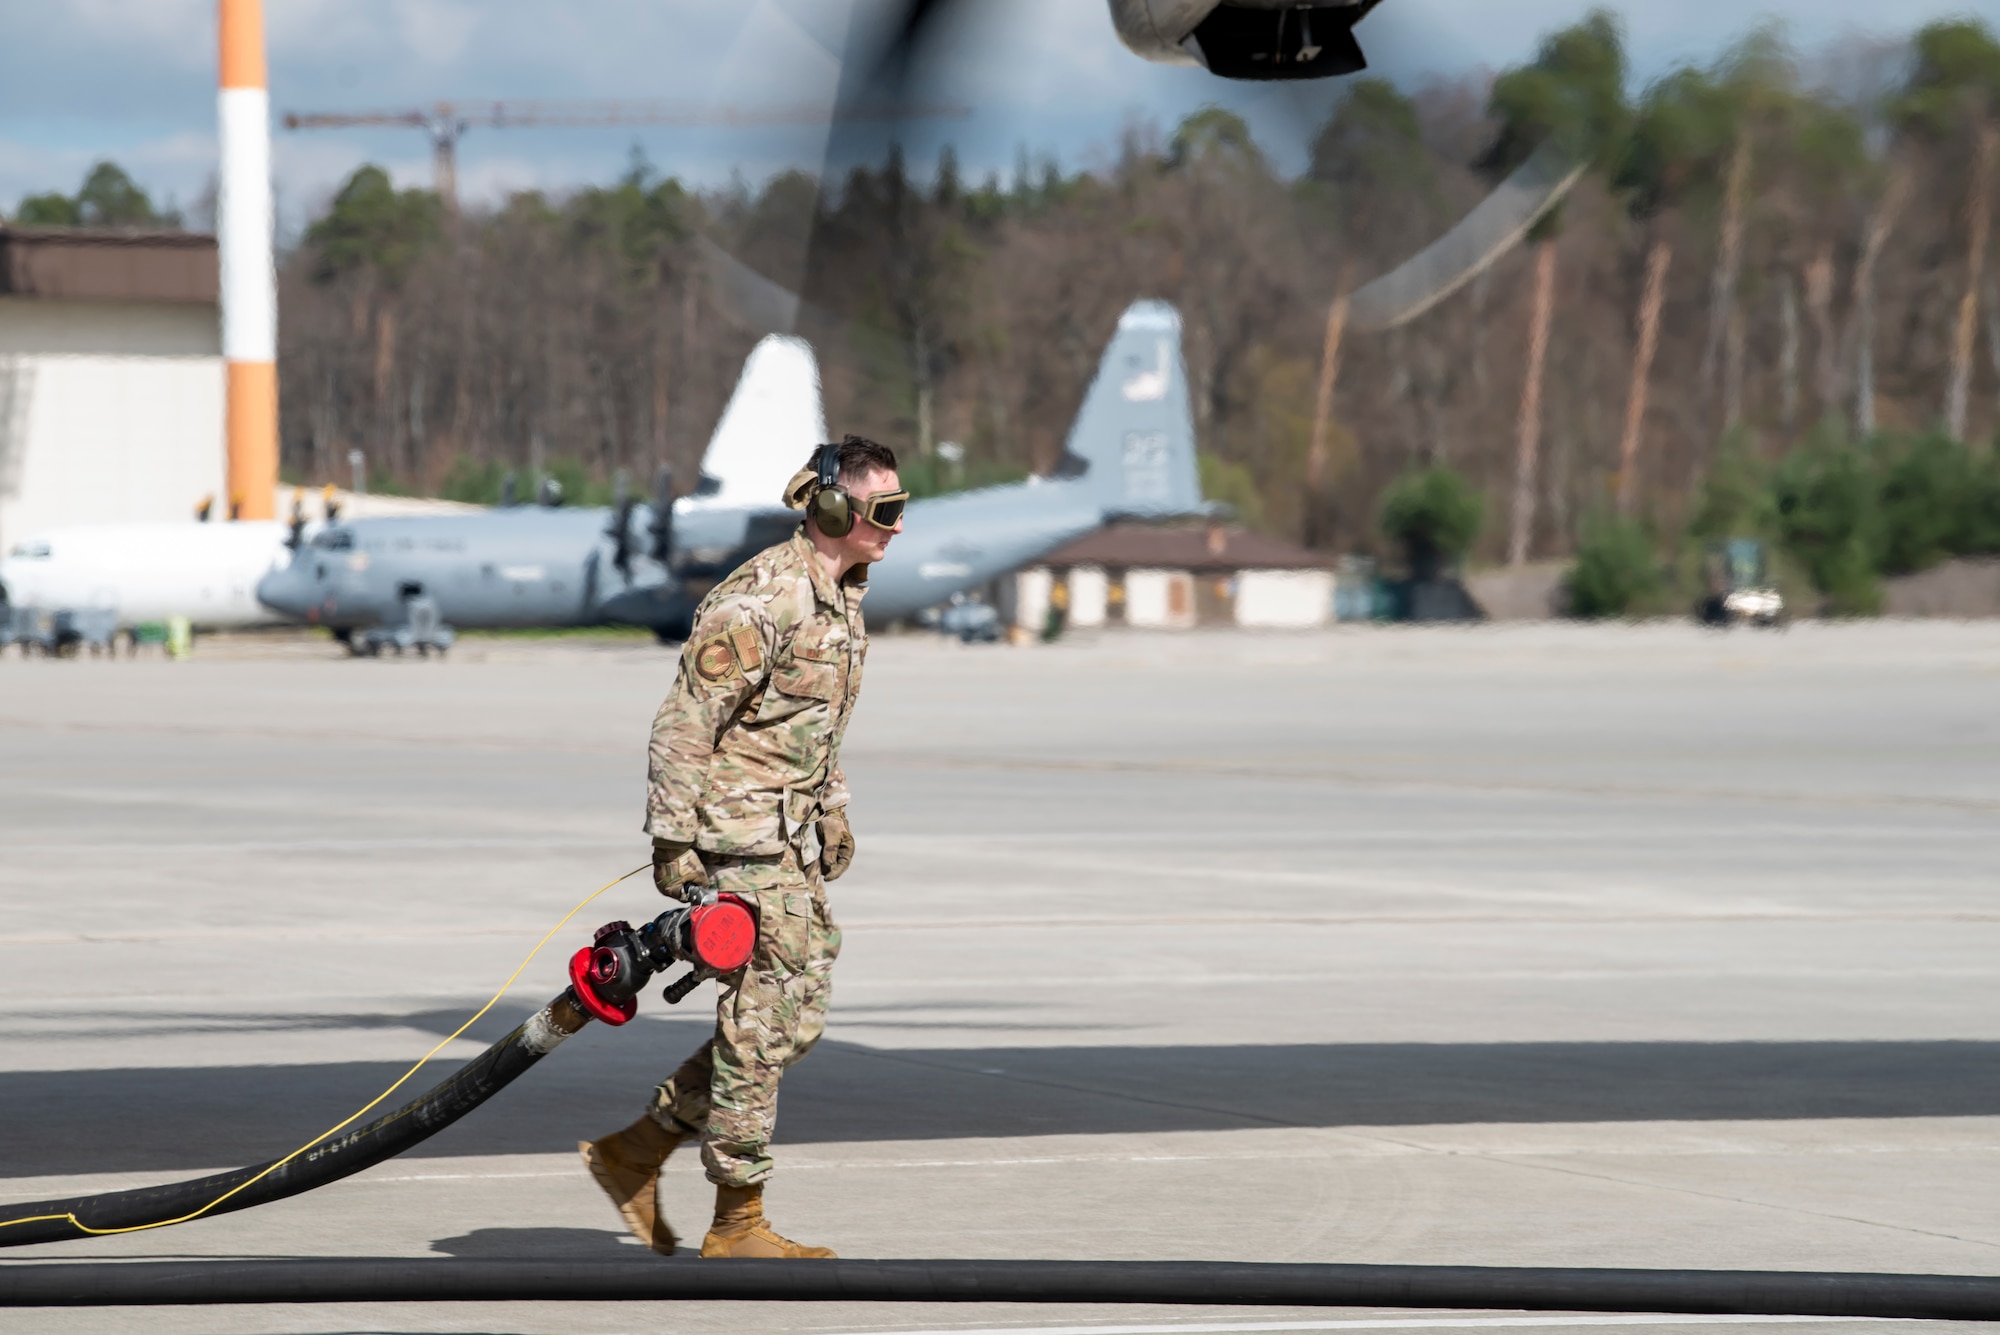 Airman carries fuel hose